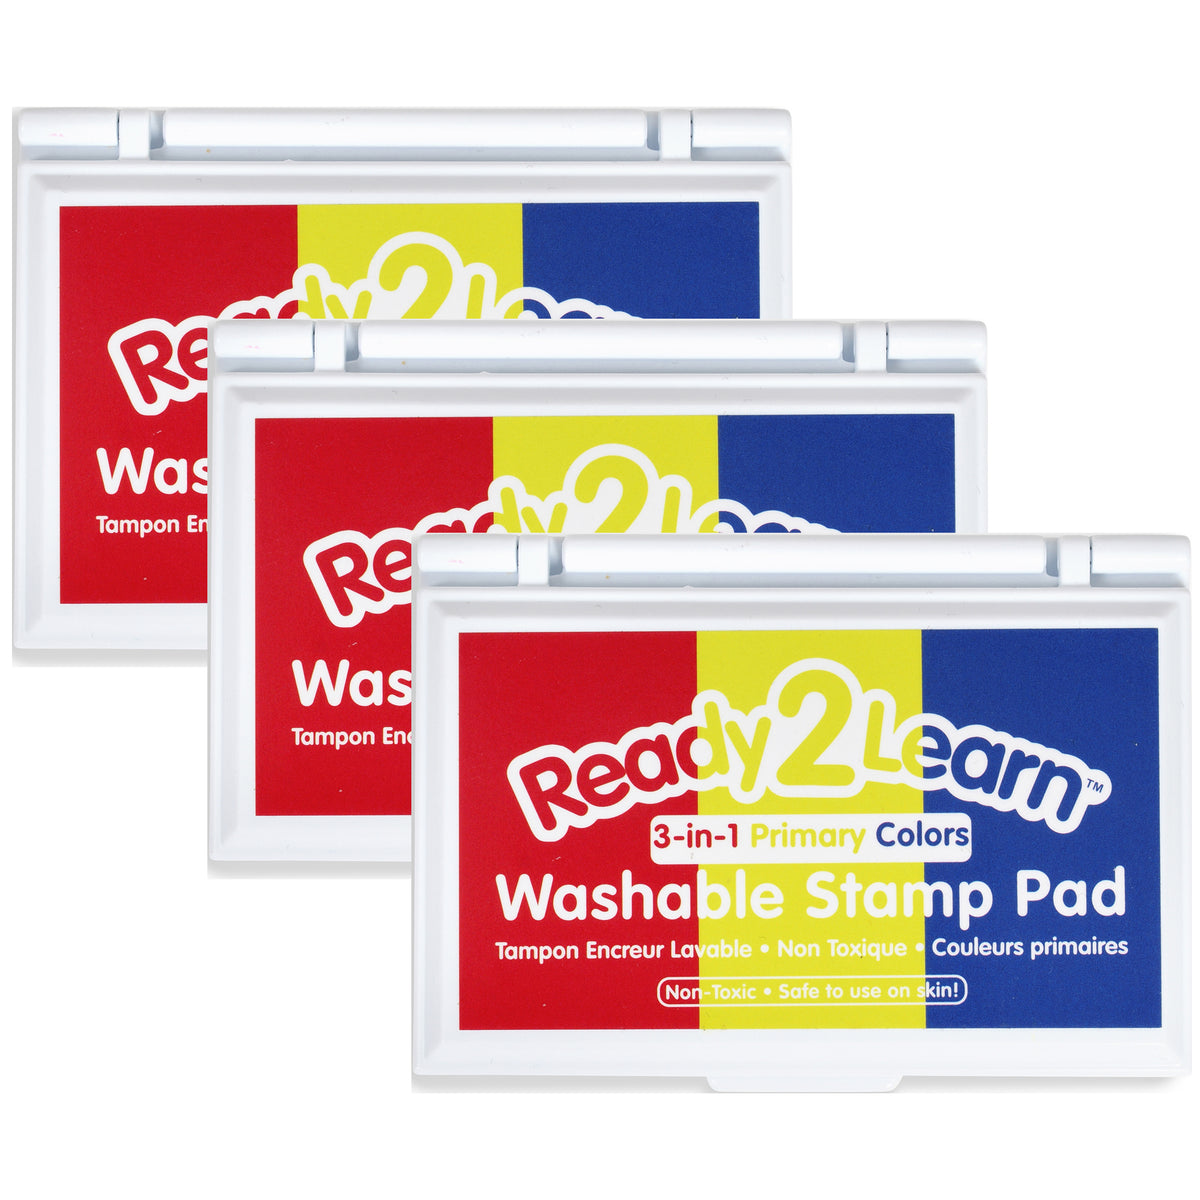 Ready 2 Learn Jumbo Washable Stamp Pad - Red - Pack of 2